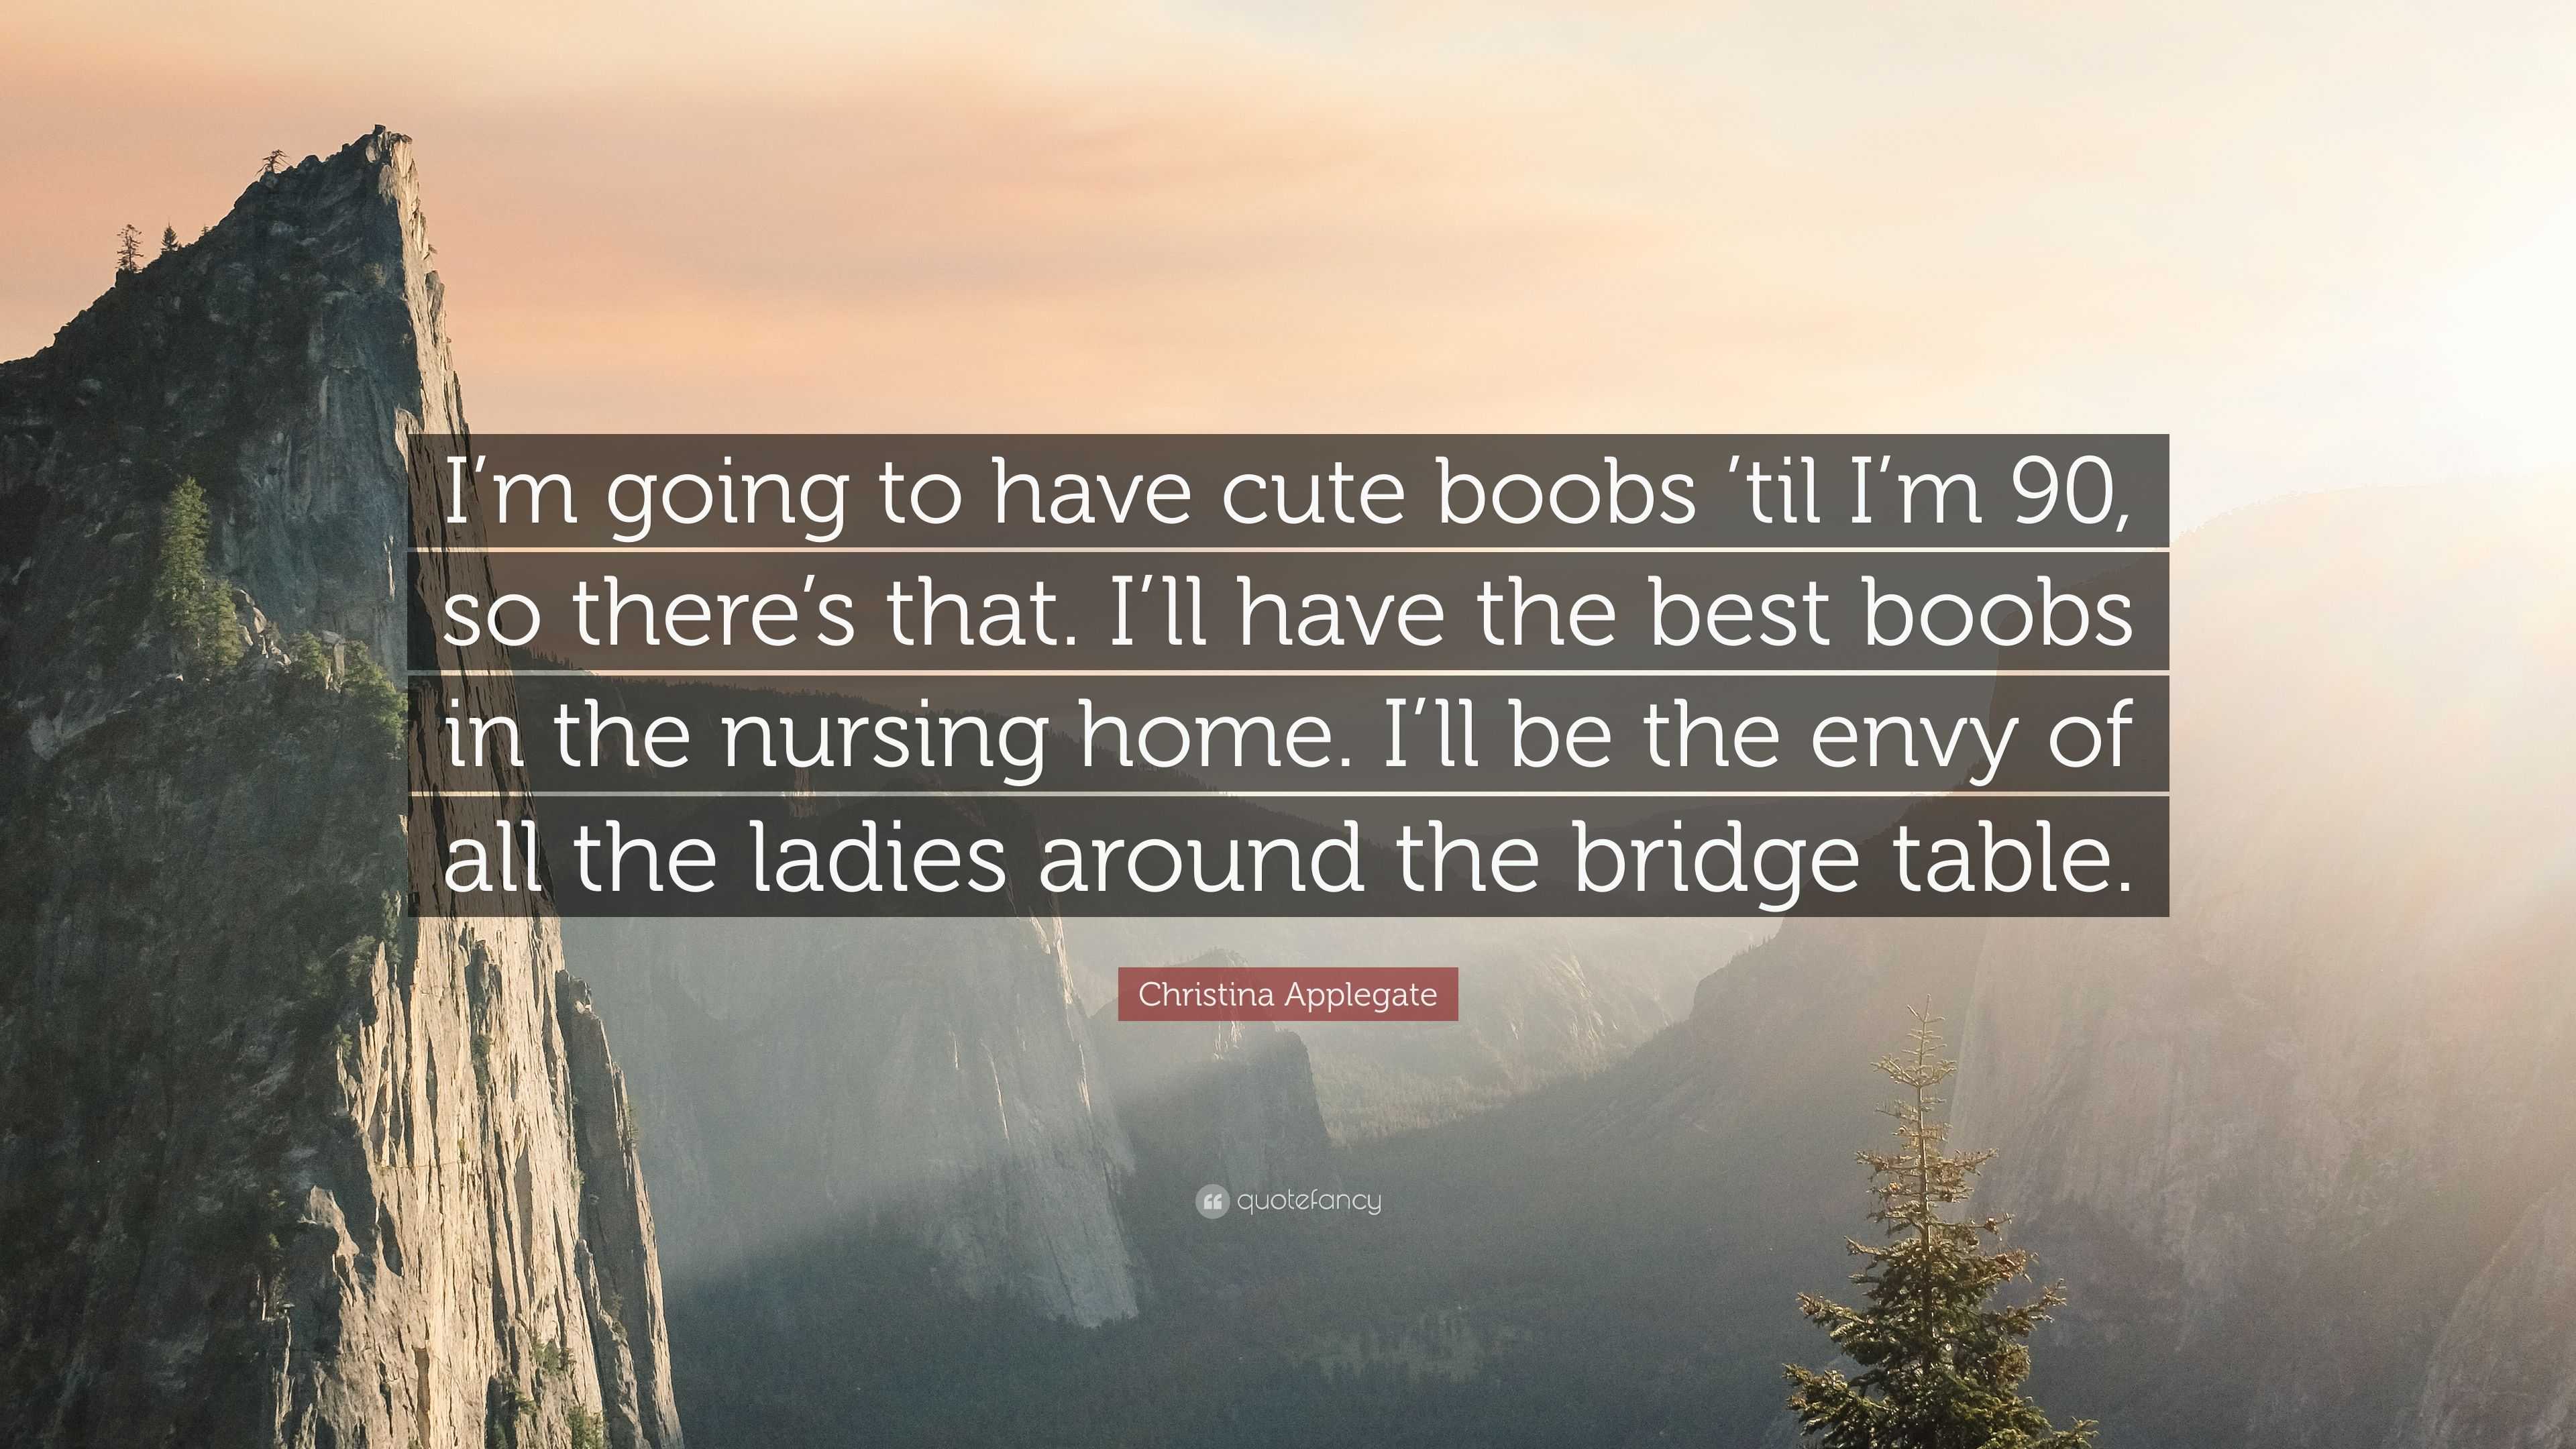 Christina Applegate Quote: “I'm going to have cute boobs 'til I'm 90, so  there's that. I'll have the best boobs in the nursing home. I'll be the env ”